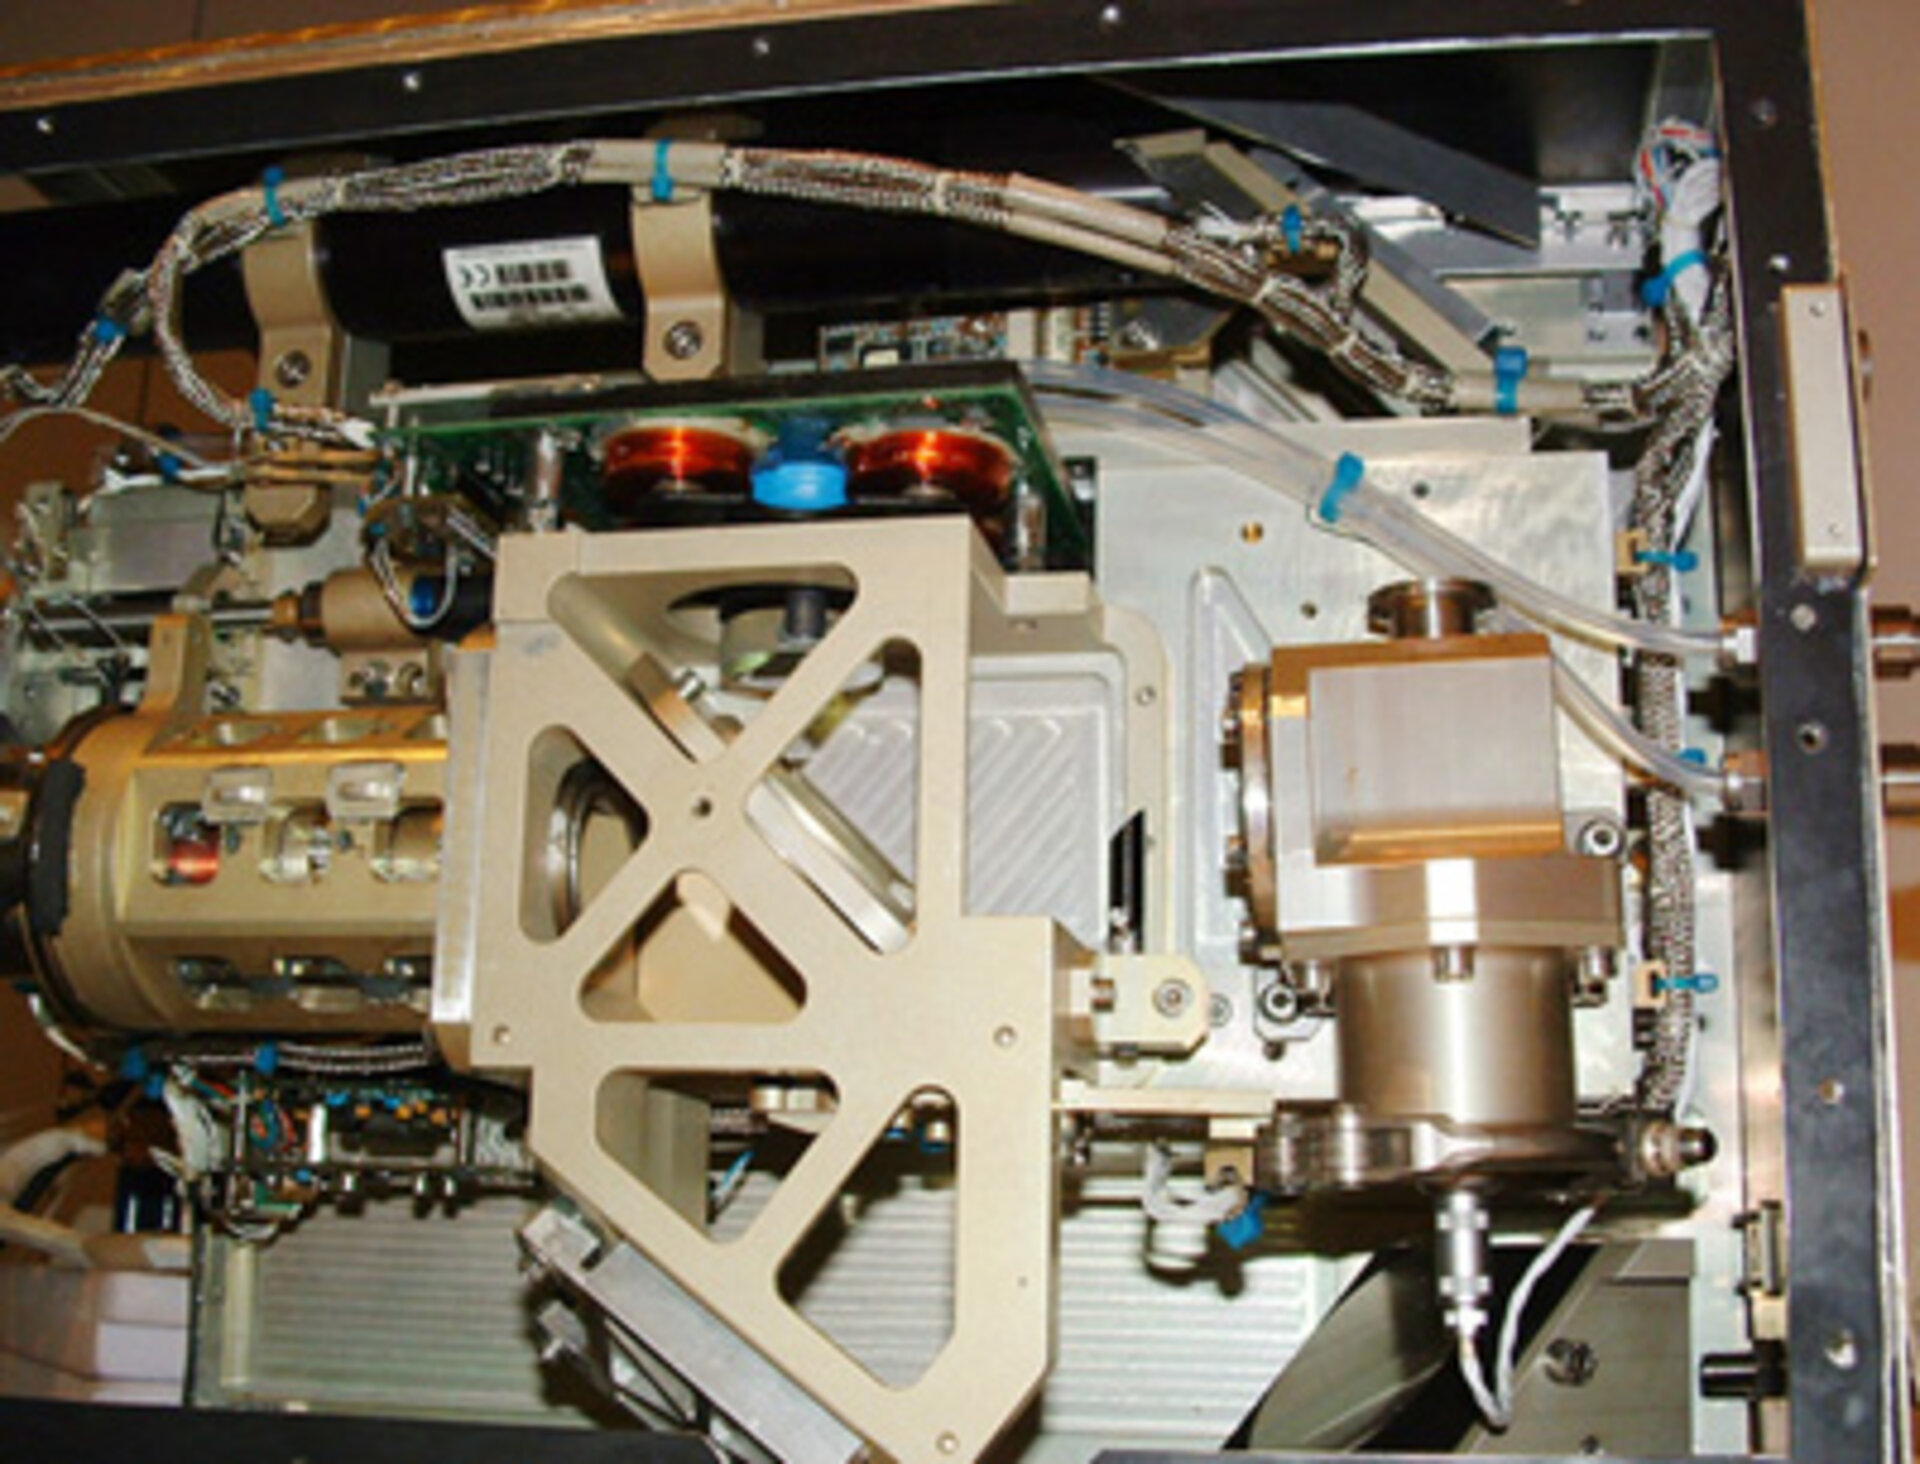 View of the main parts of the FTIR interferometer